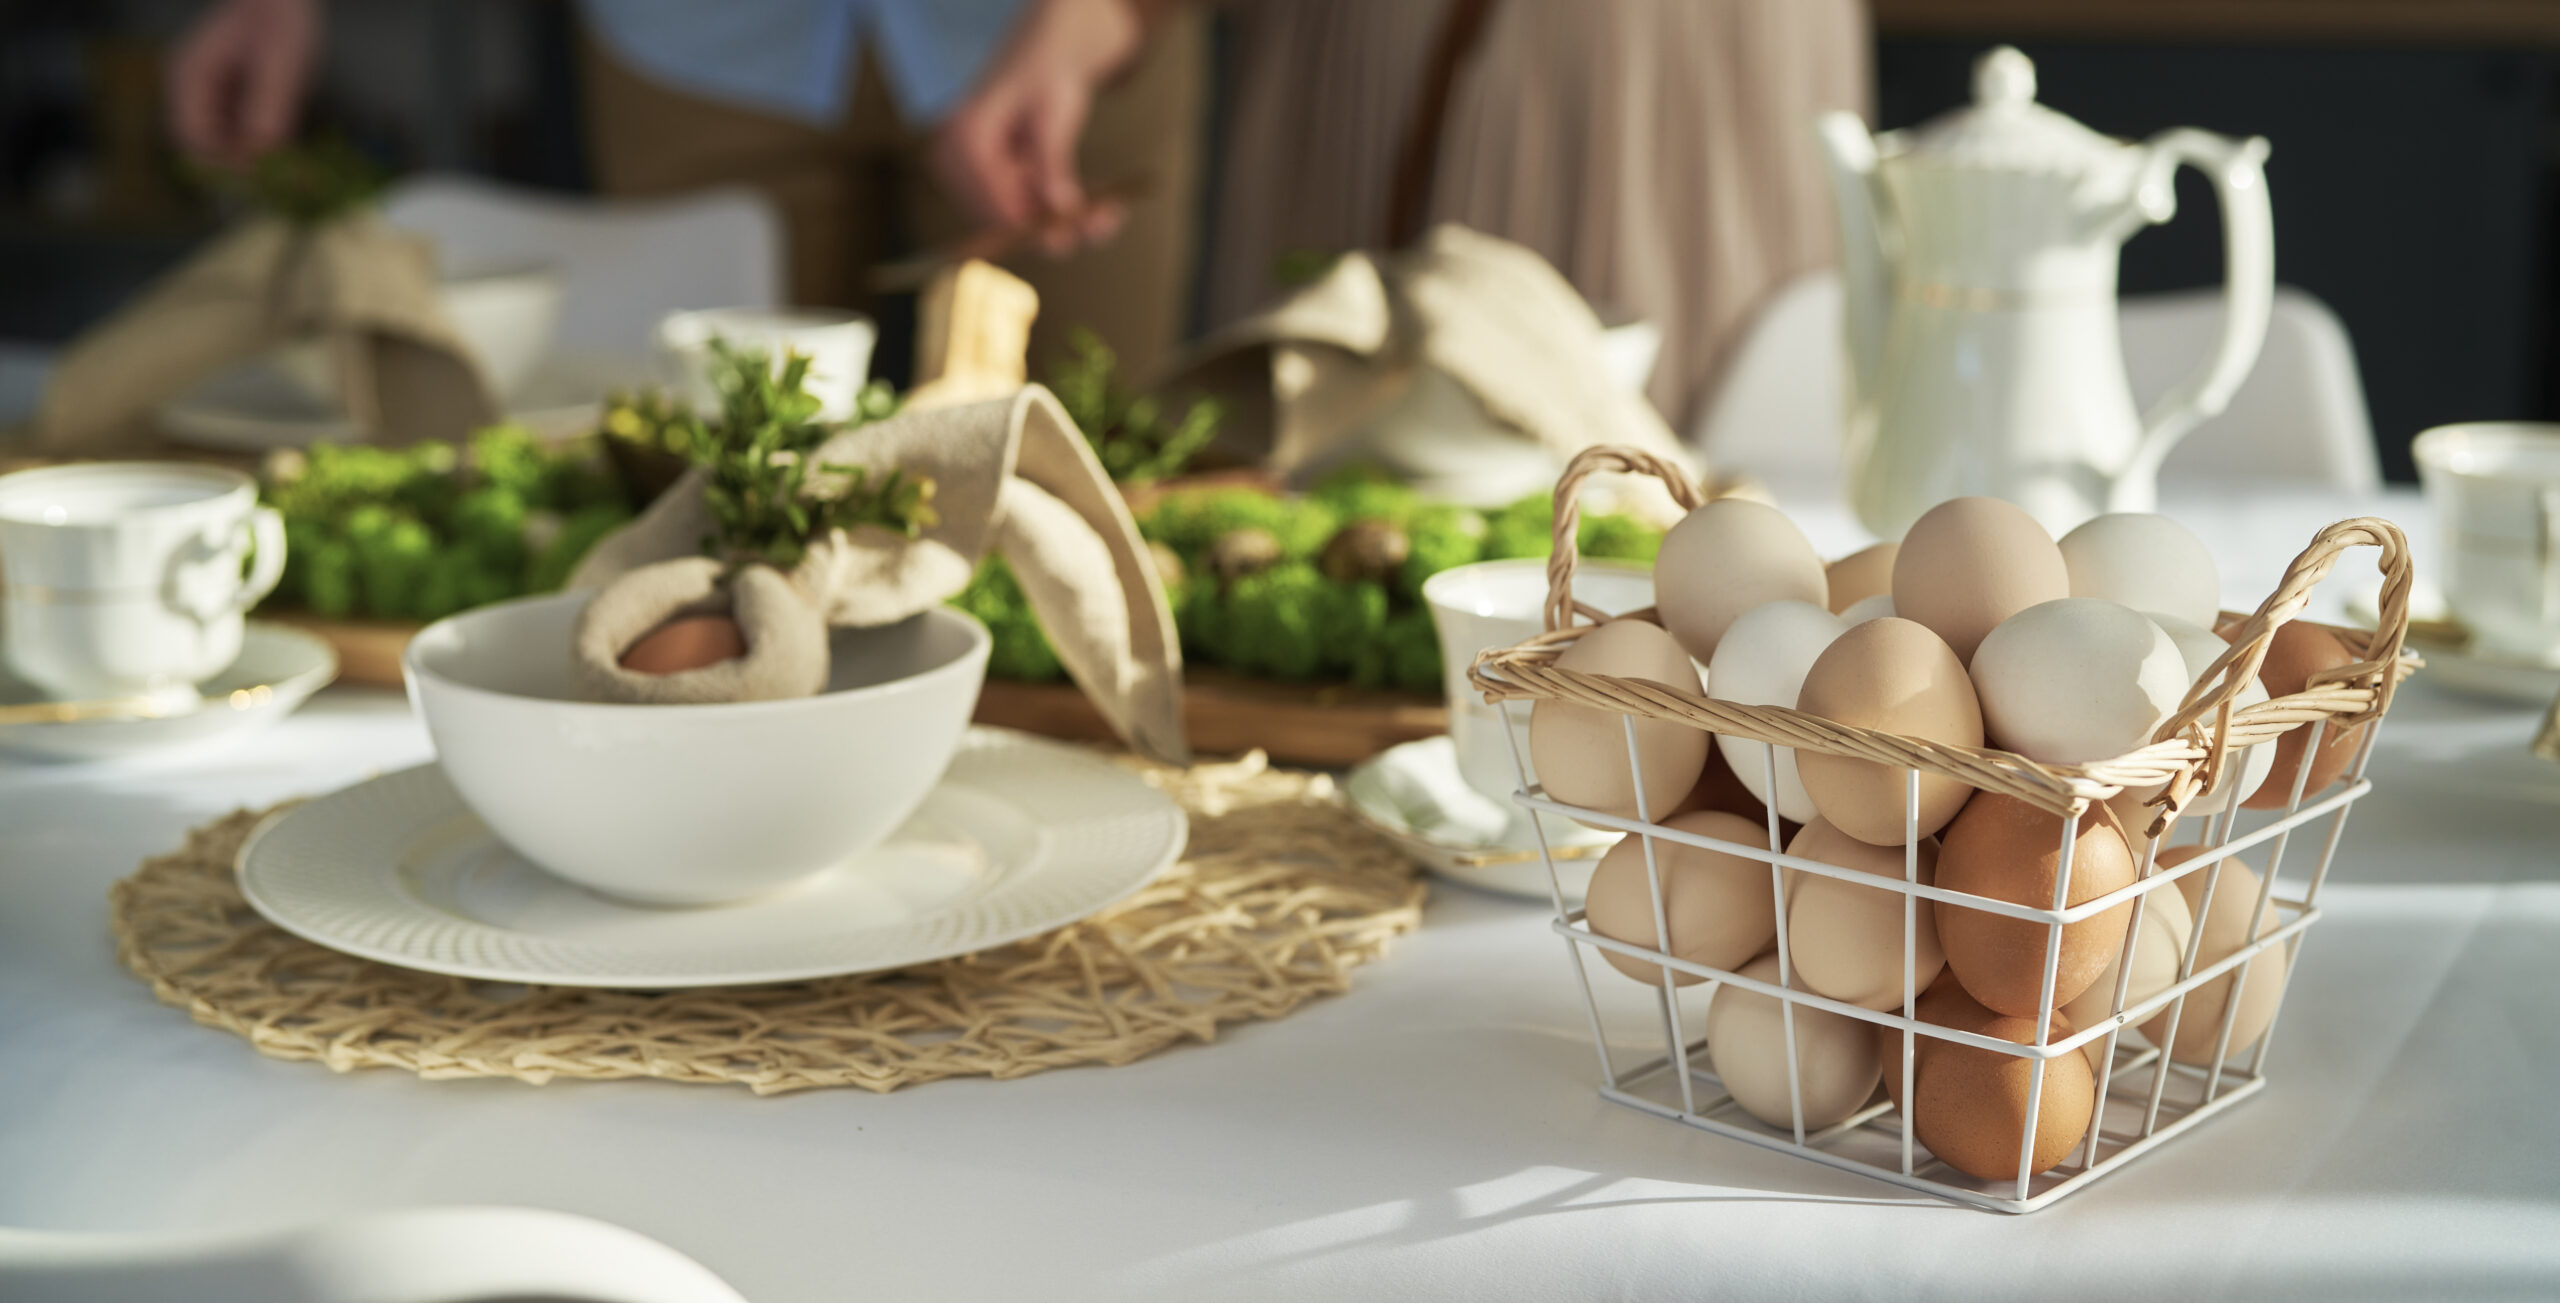 Rustic Easter table with basket of eggs for Easter dining in Brentwood, Tennessee.